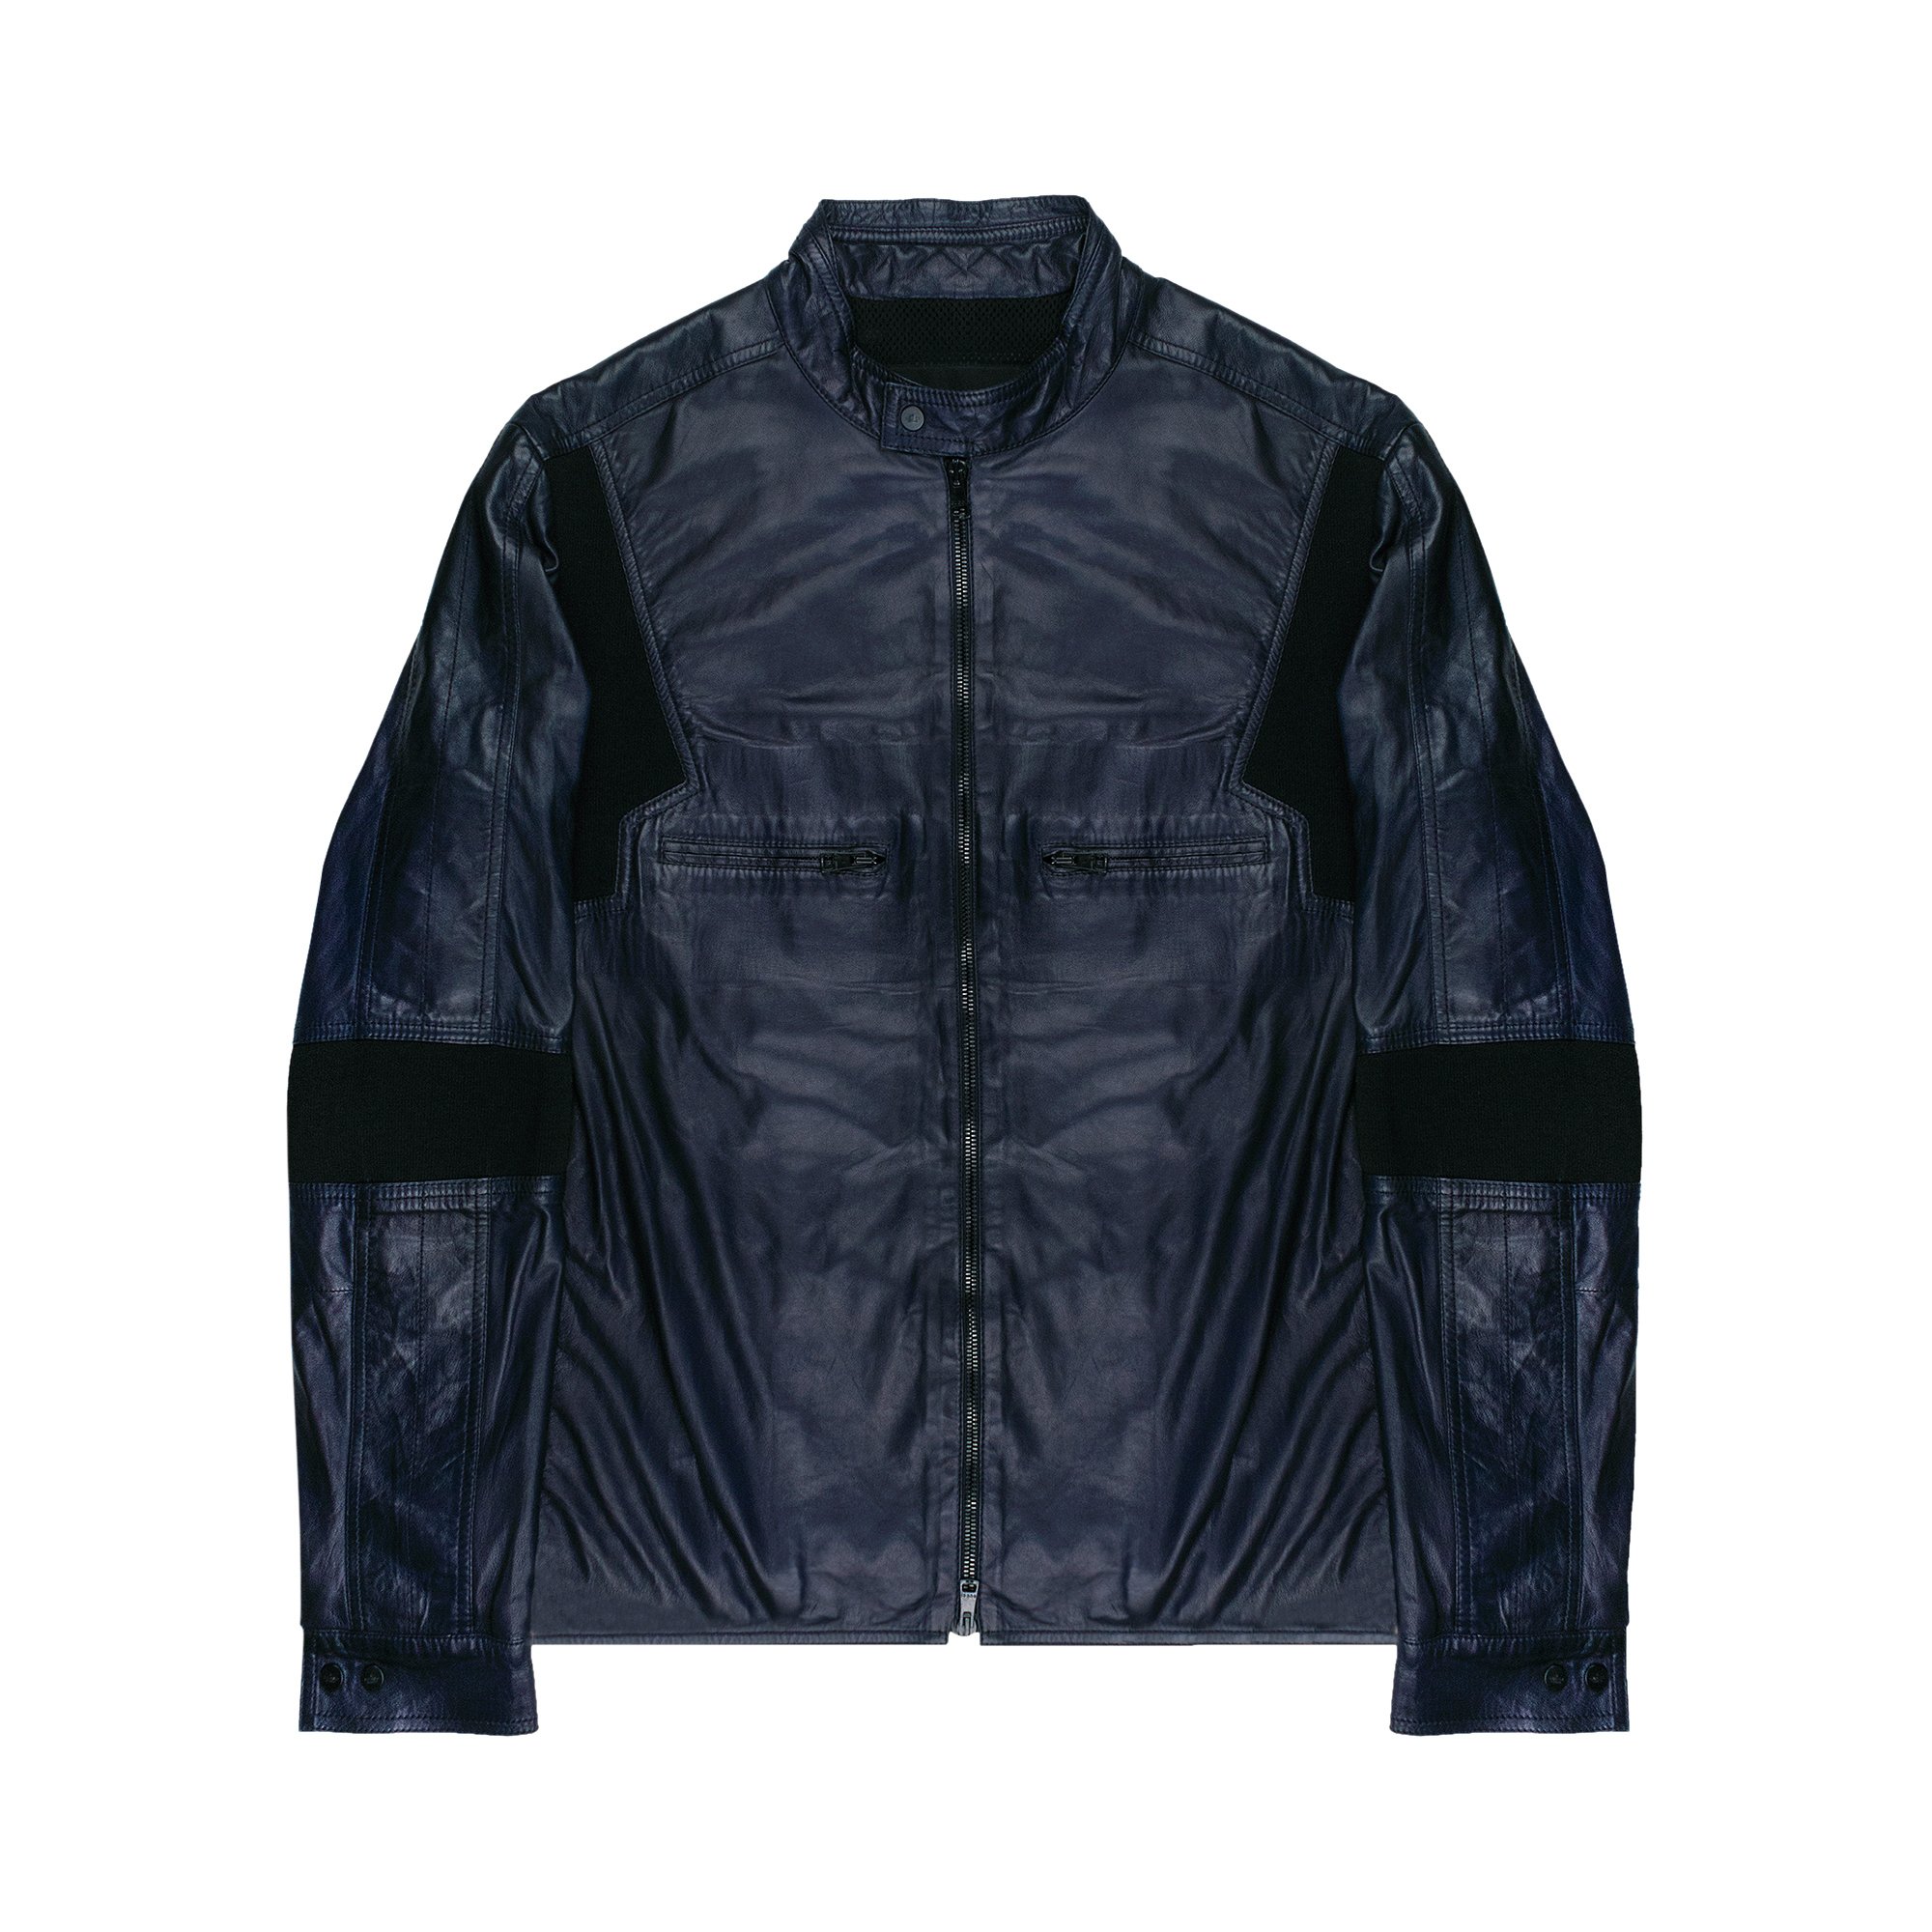 Buy Pre-Owned Gucci by Tom Ford Vintage Leather Moto Jacket 'Blue